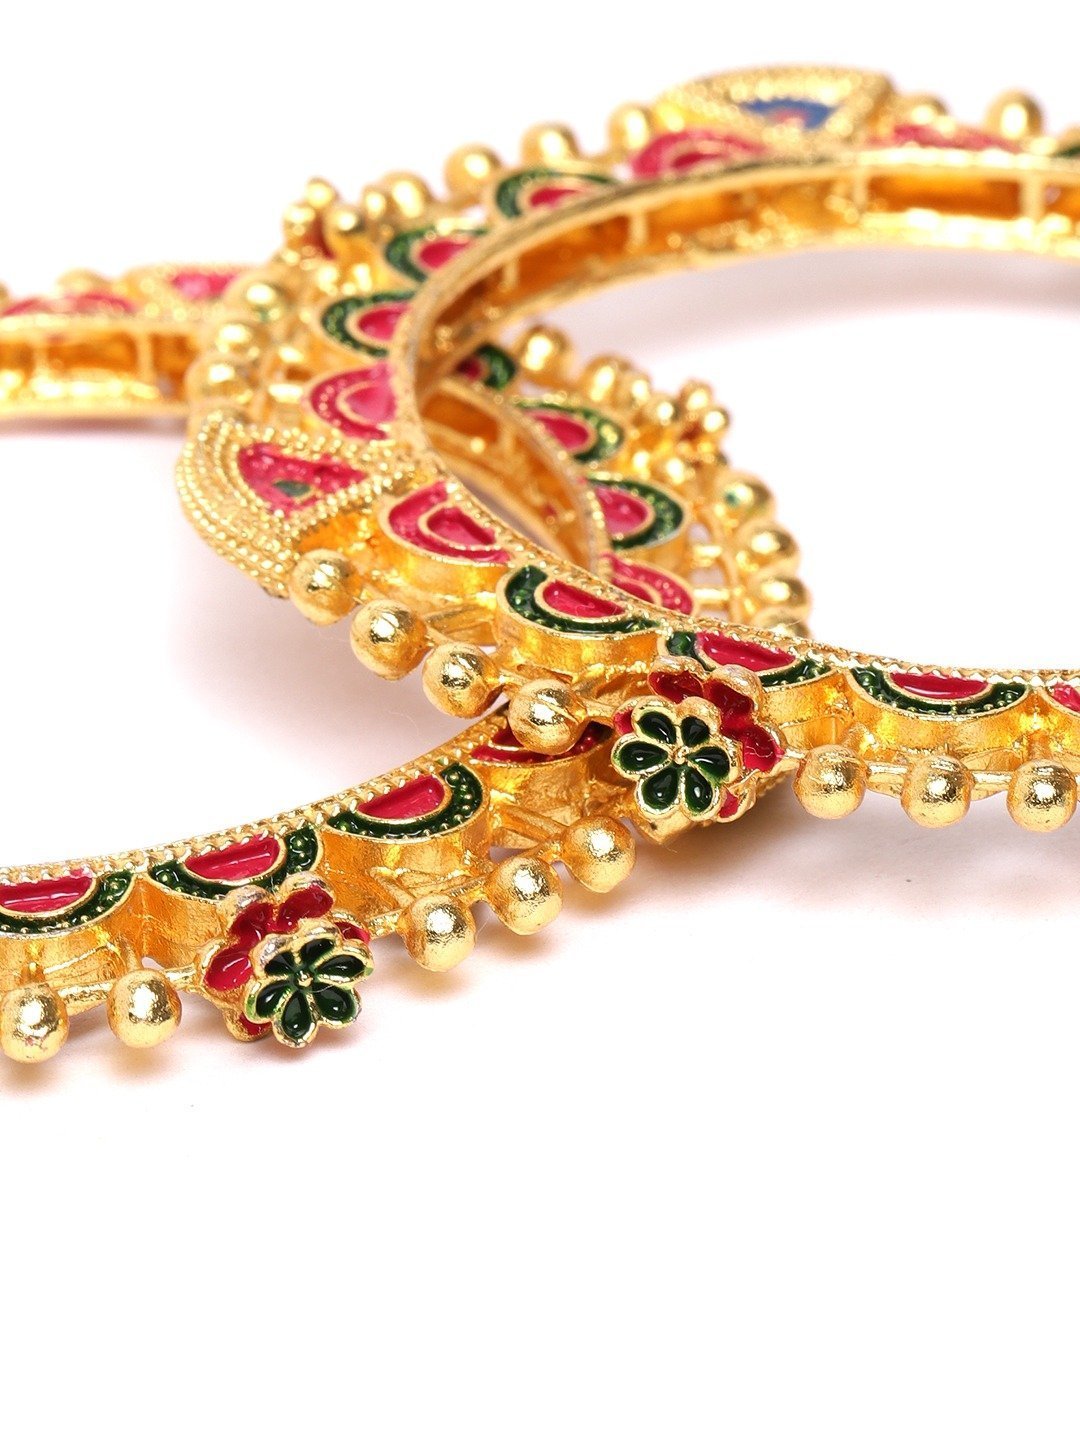 Women's Set of 2 Gold Plated Red and Blue Colored Embellished Bangles - Priyaasi